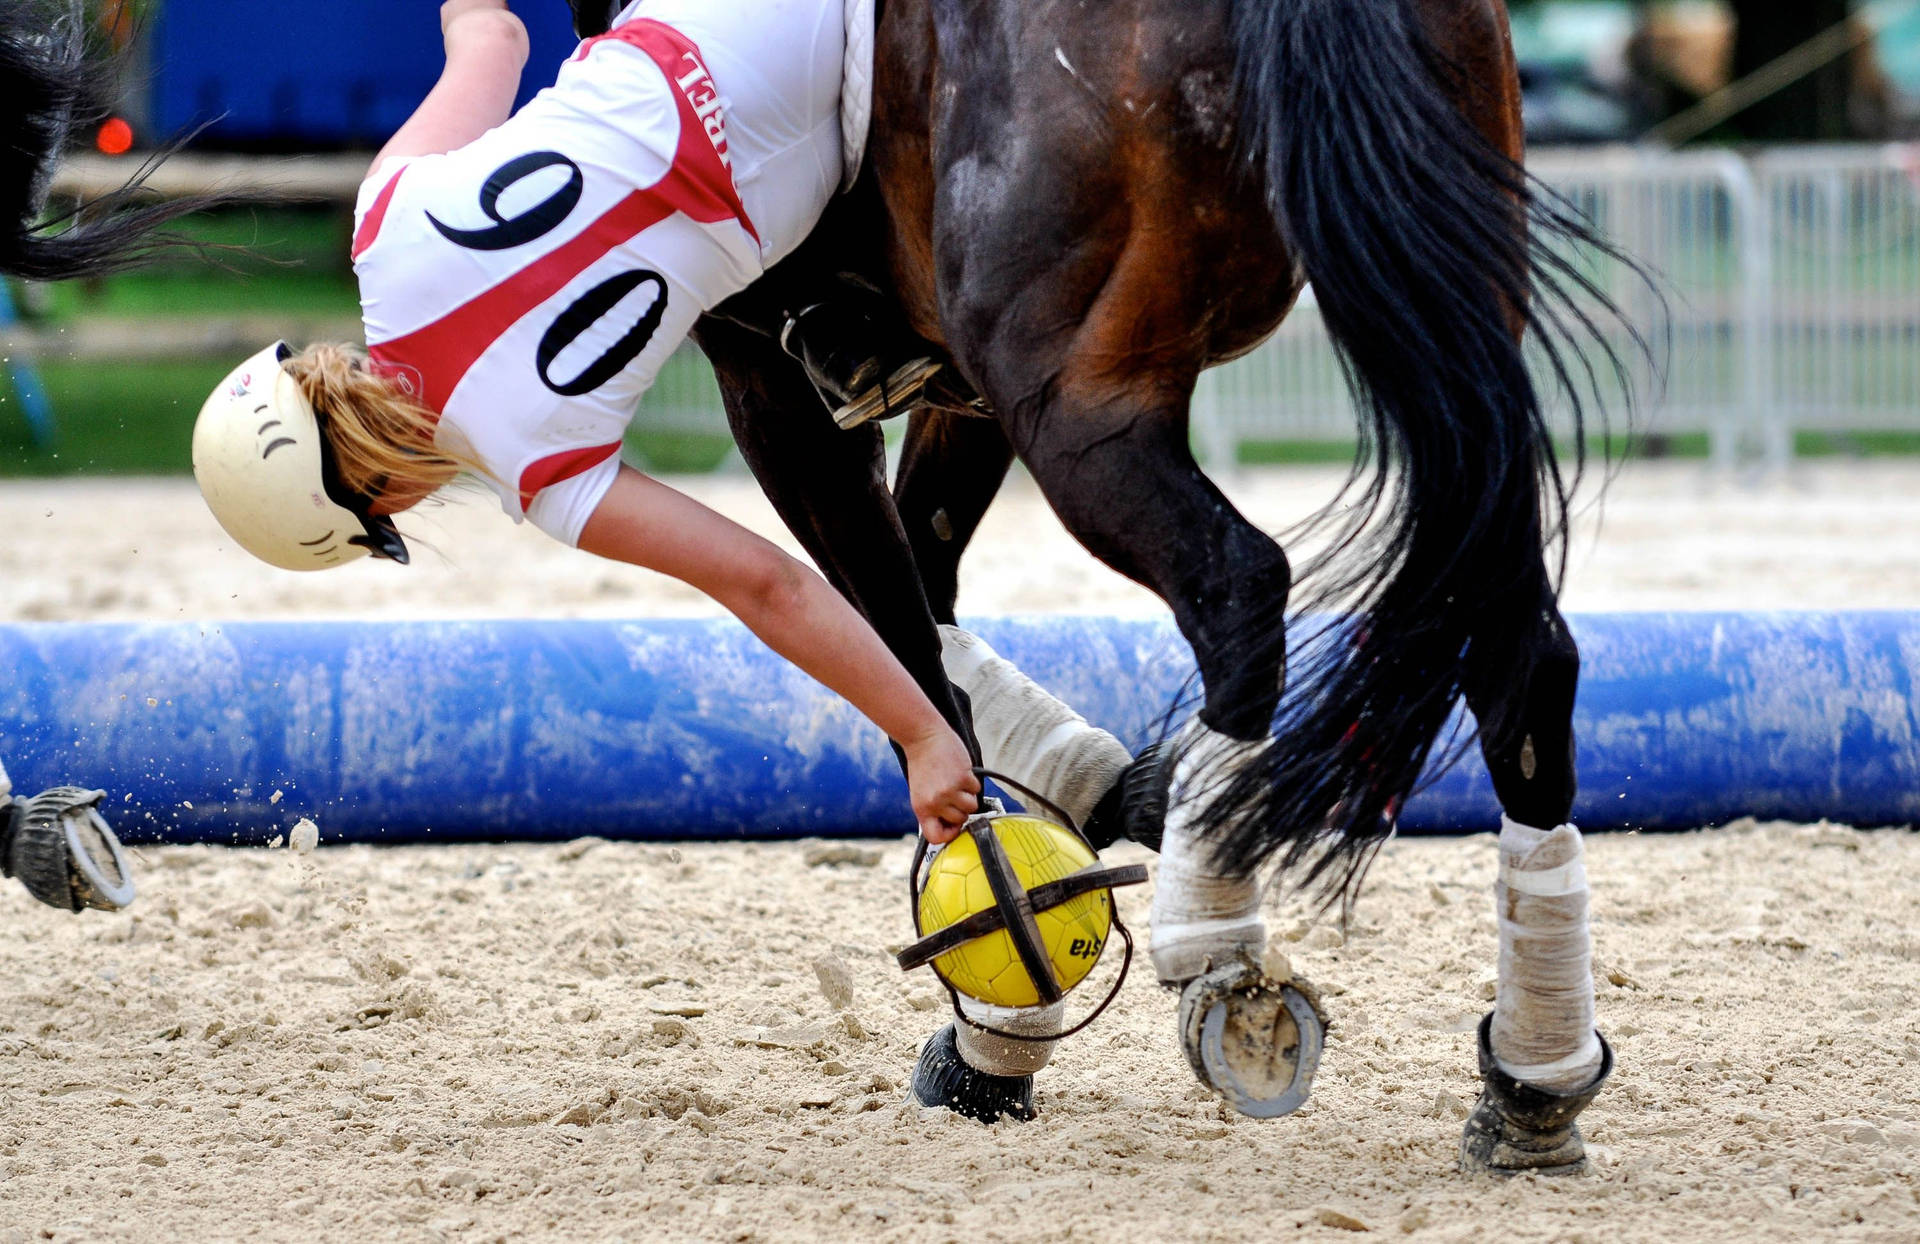 Female Equestrian Falling During Her Match Wallpaper